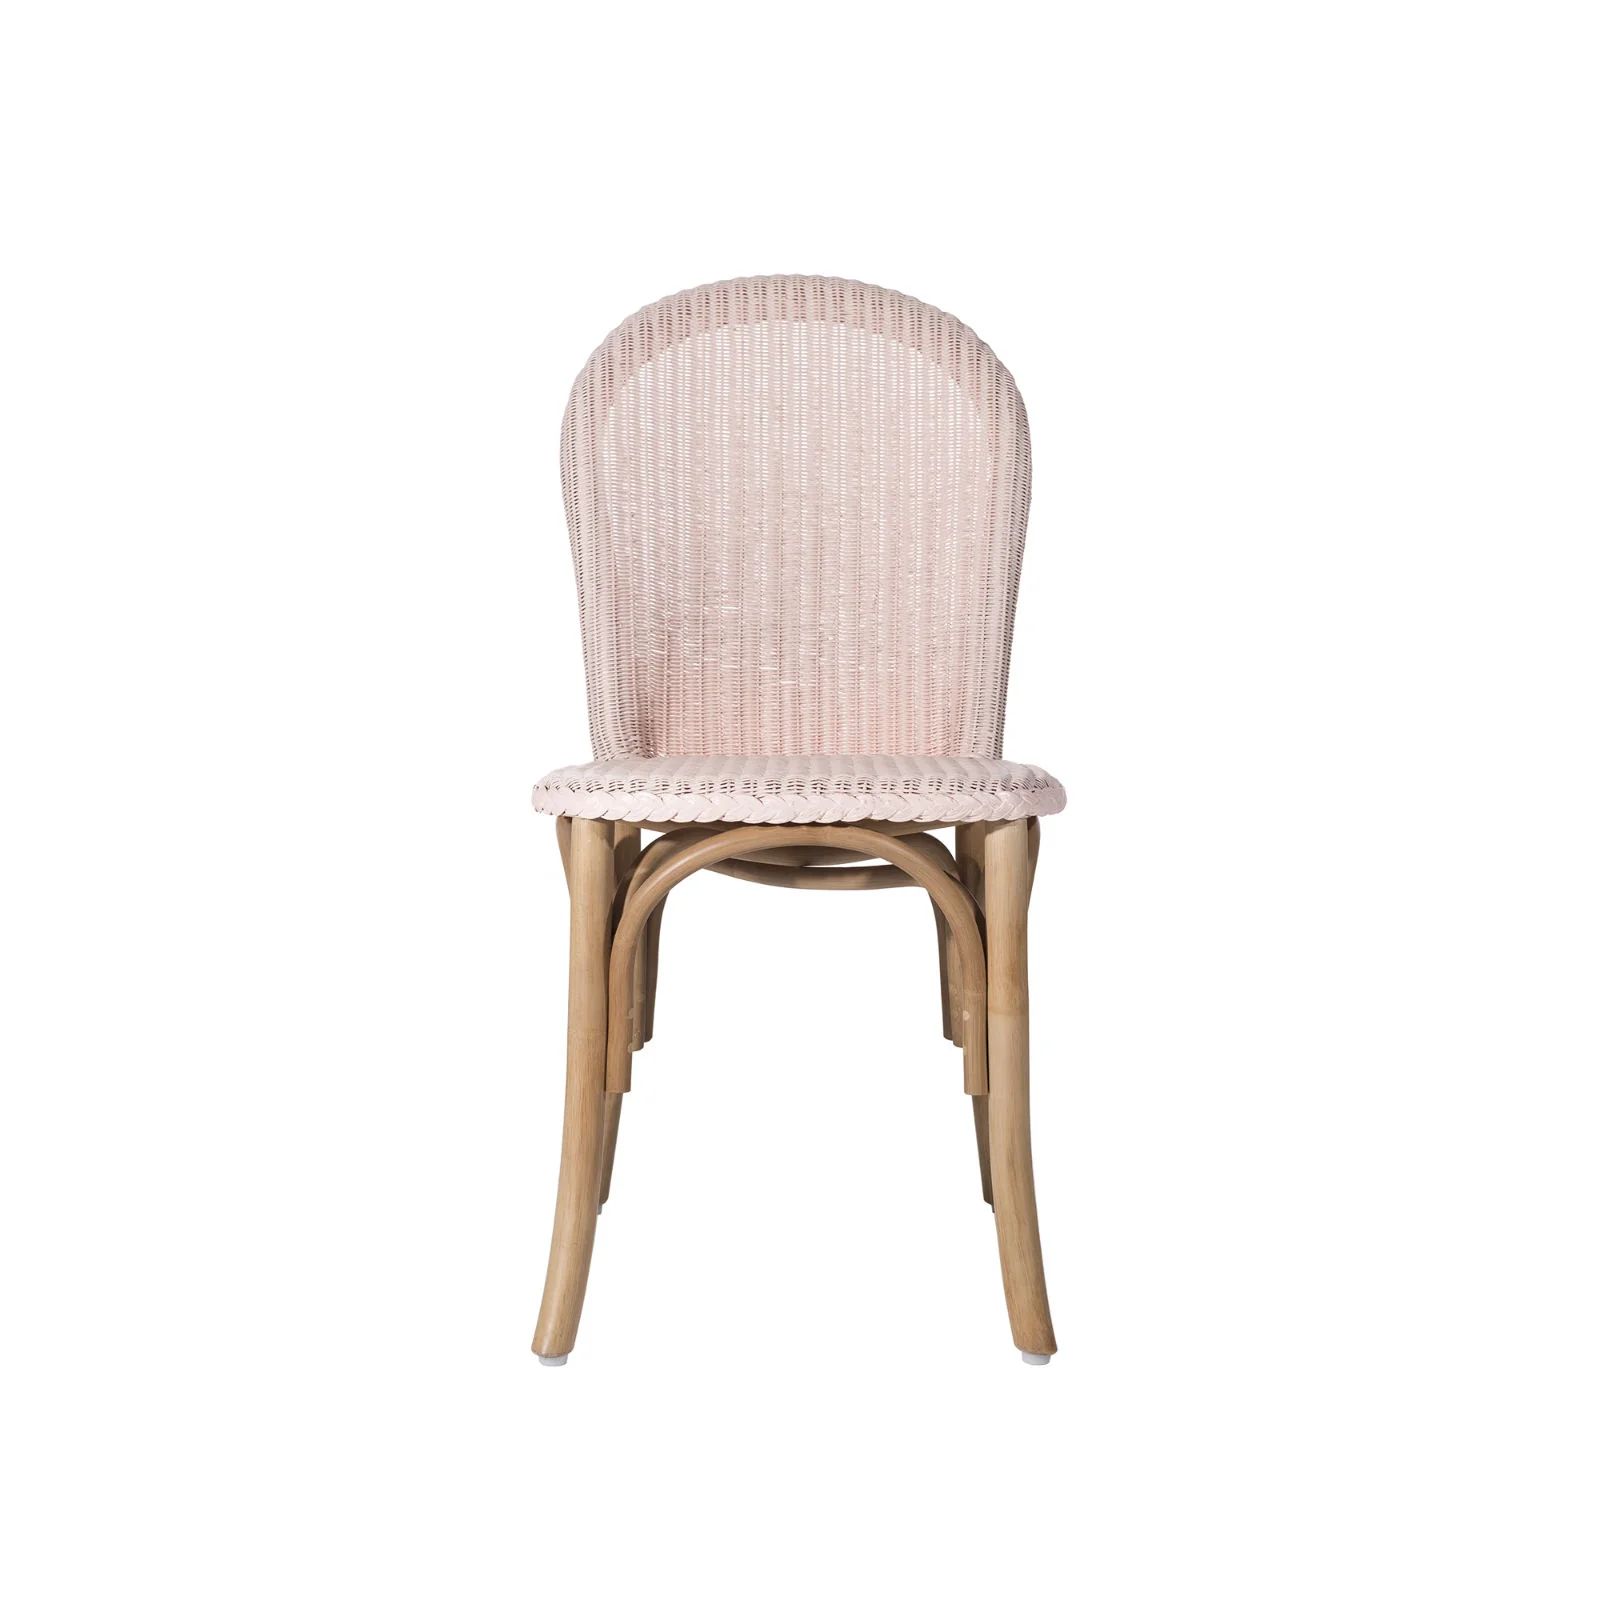 Draper Chair in Pink | Brooke and Lou